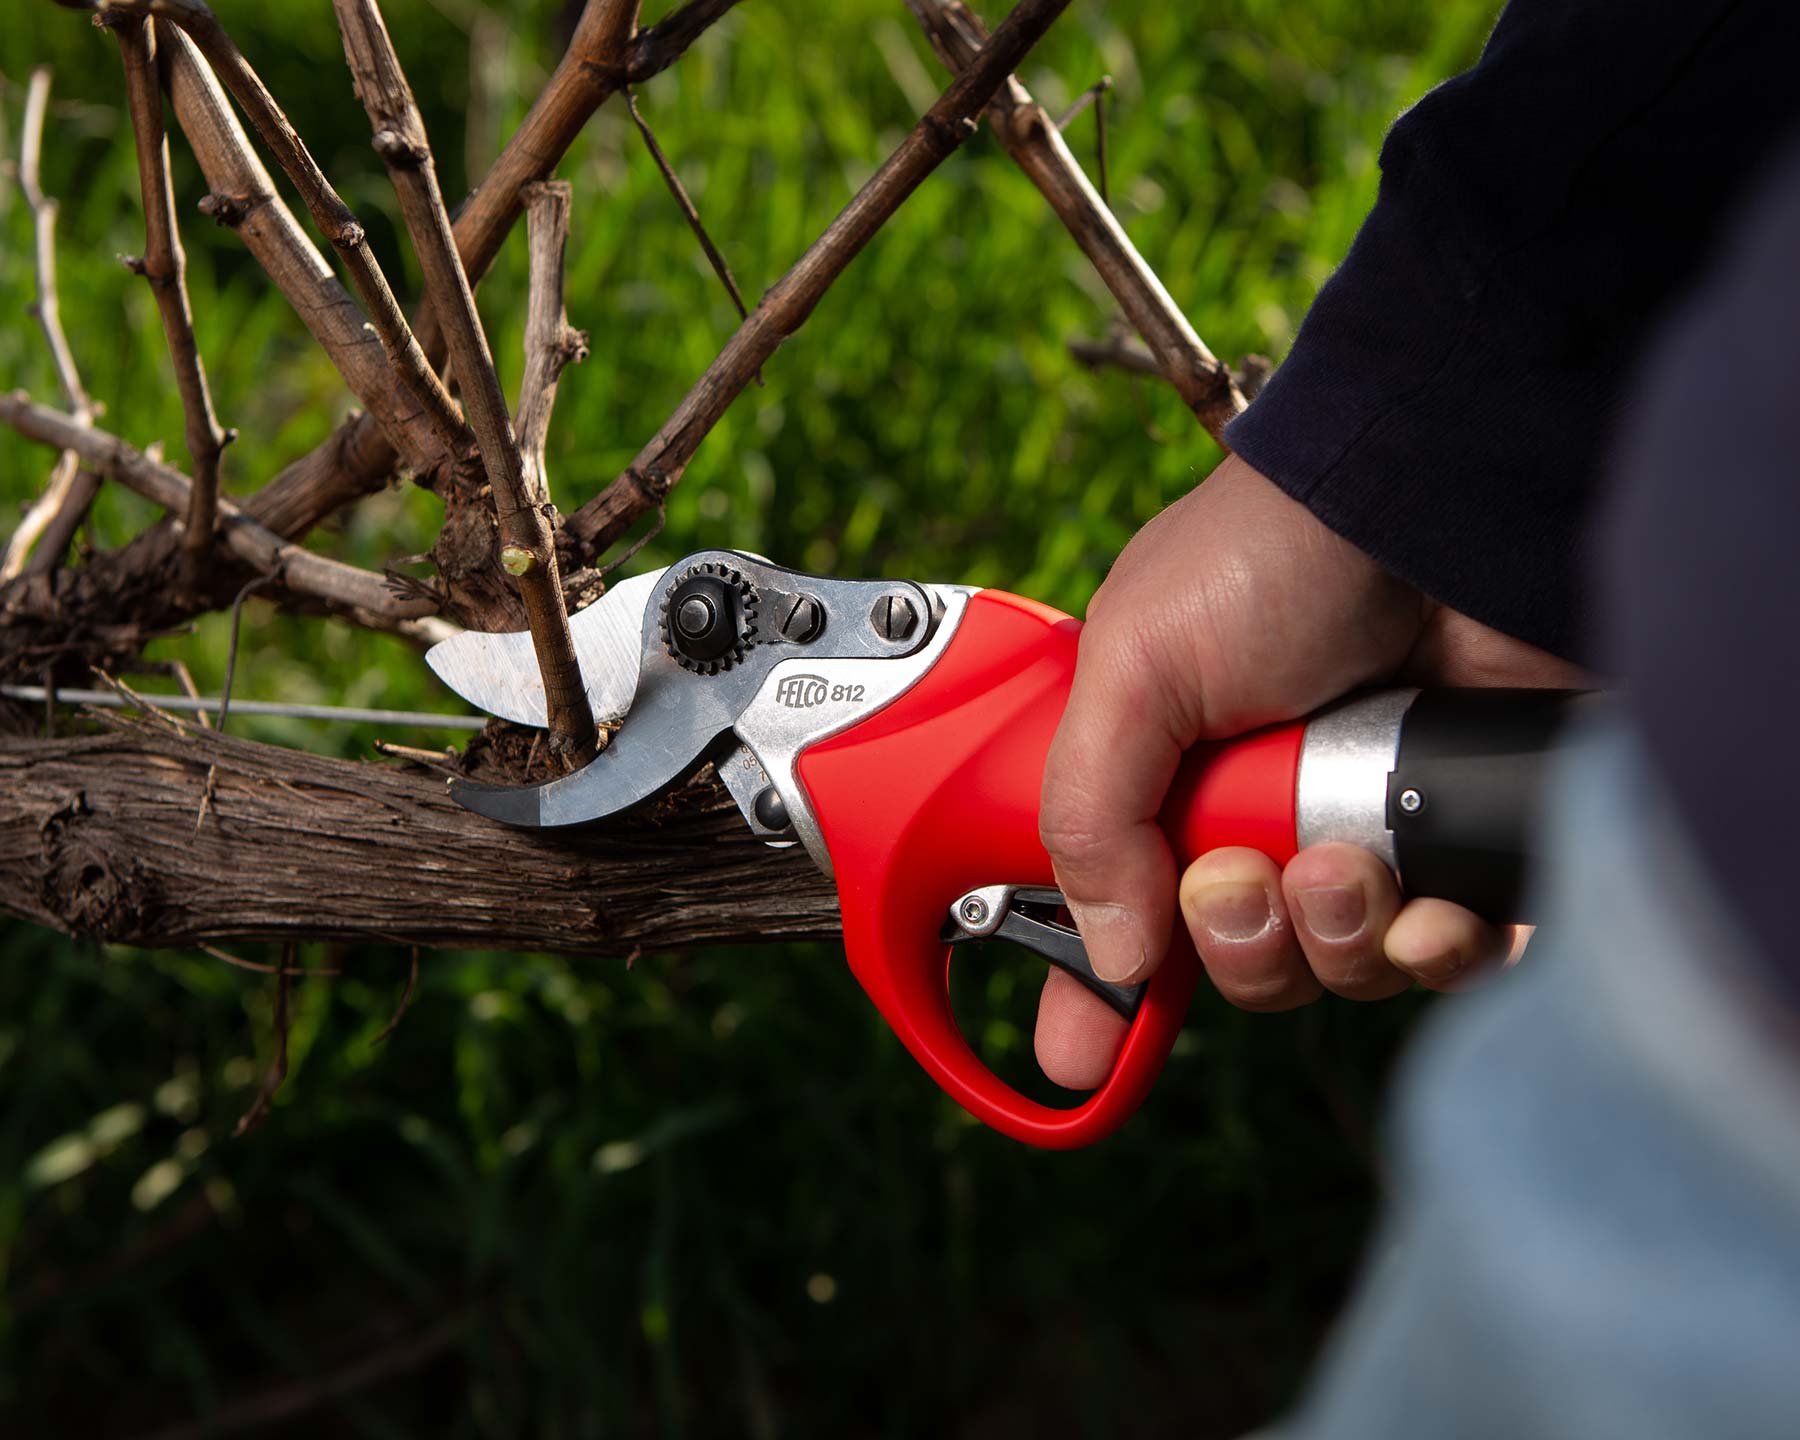 Felco 812 Powerblade electric pruning shears cut through branches up to 35mm in diam